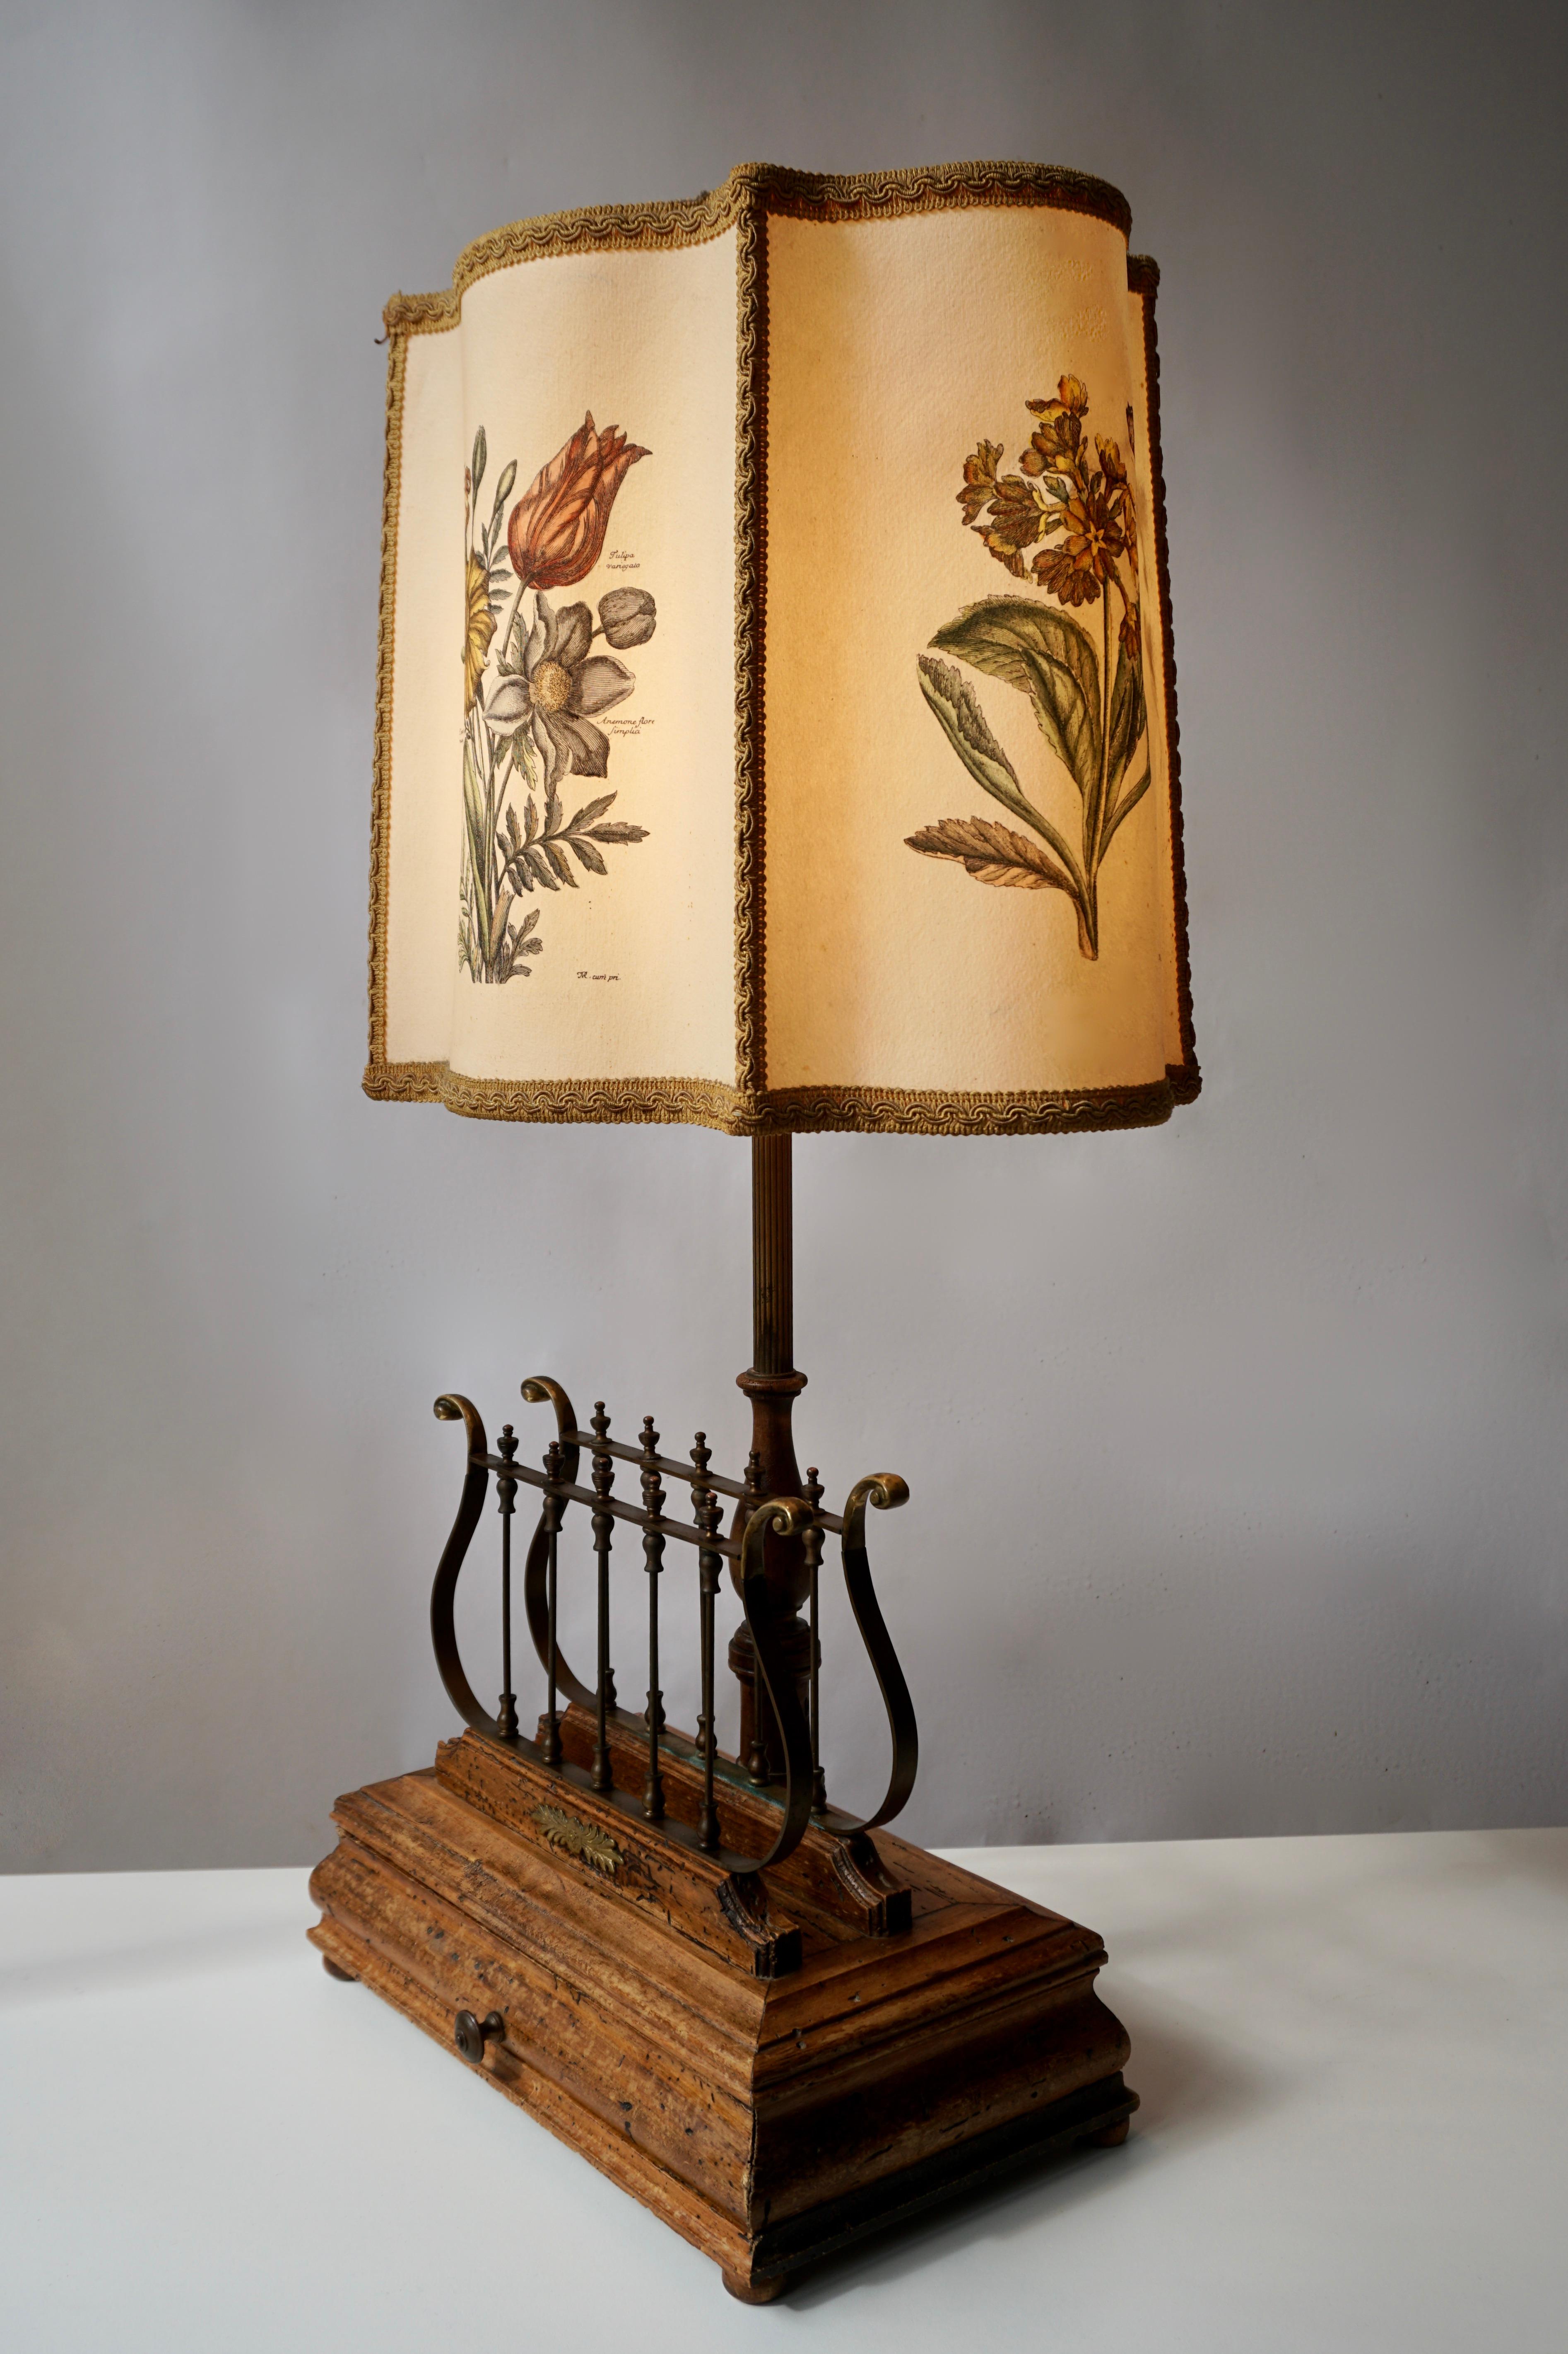 Flower table lamp in brass and wood.
Measures: Height 70 cm.
width 37 cm.
depth 26 cm.